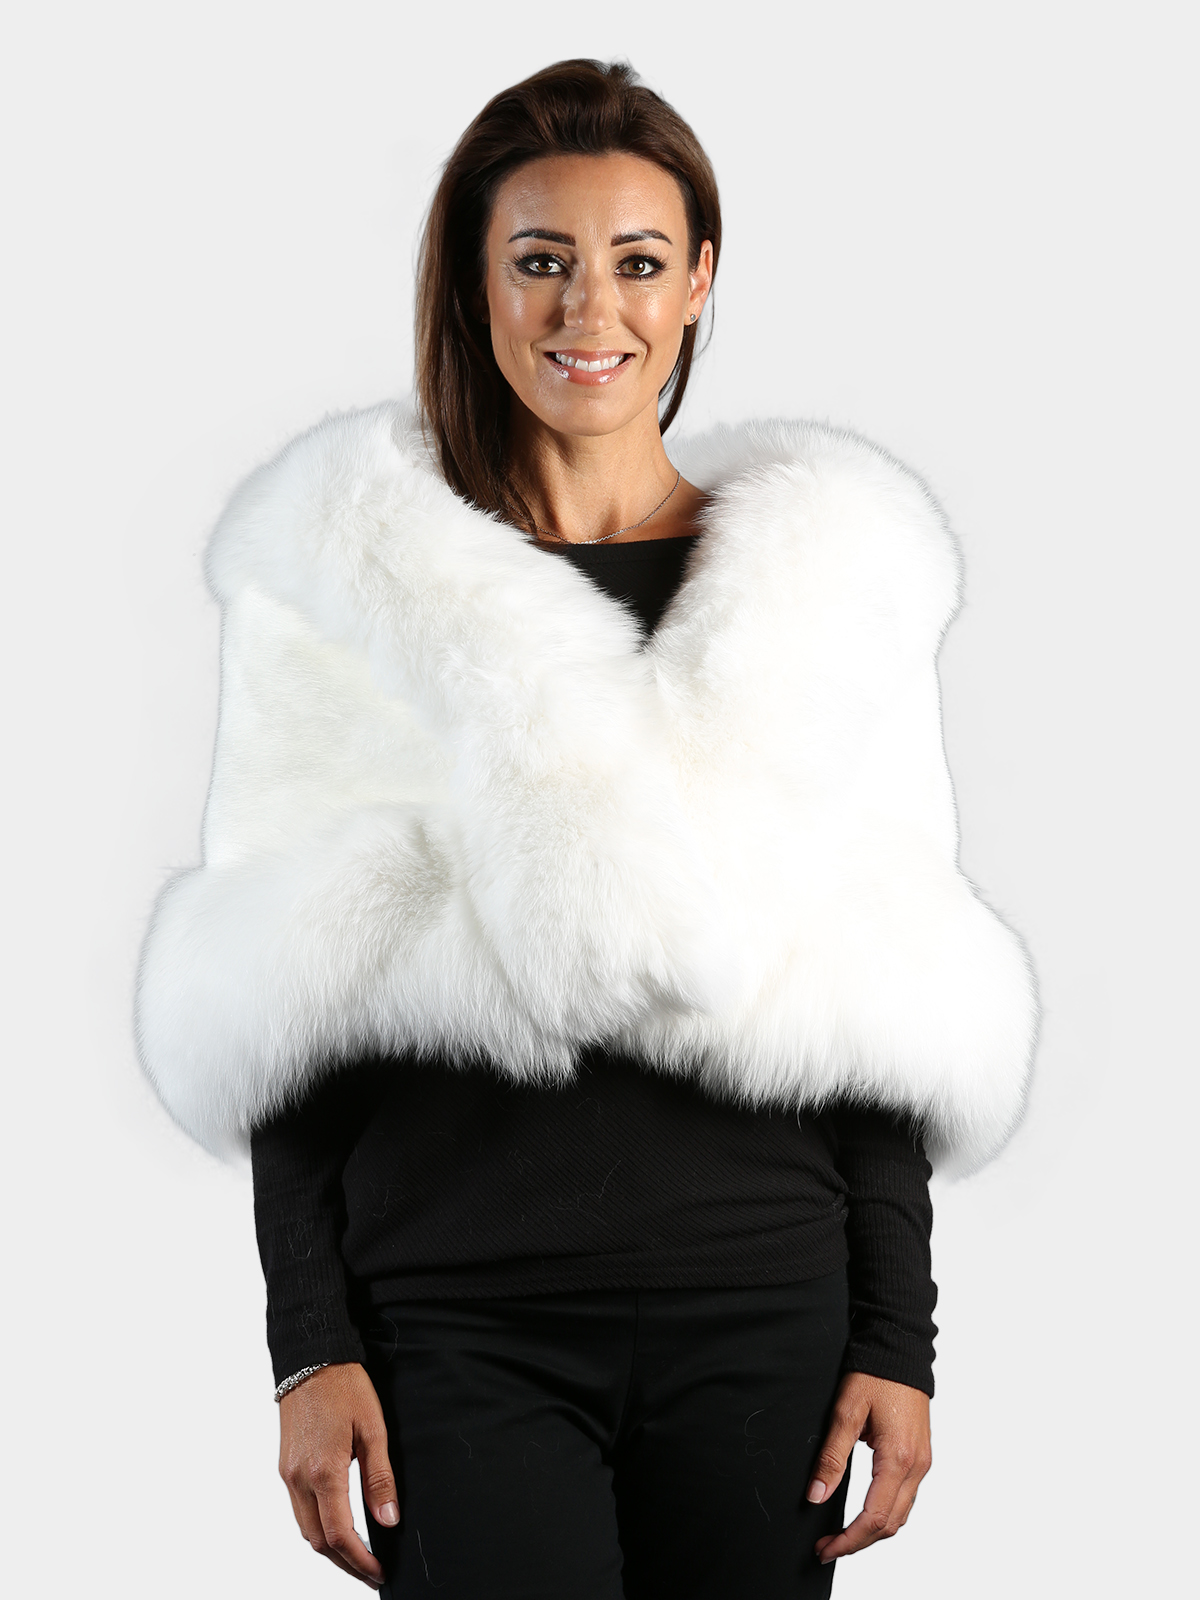 Woman's White Mink Fur Capelet with Matching Fox Trim